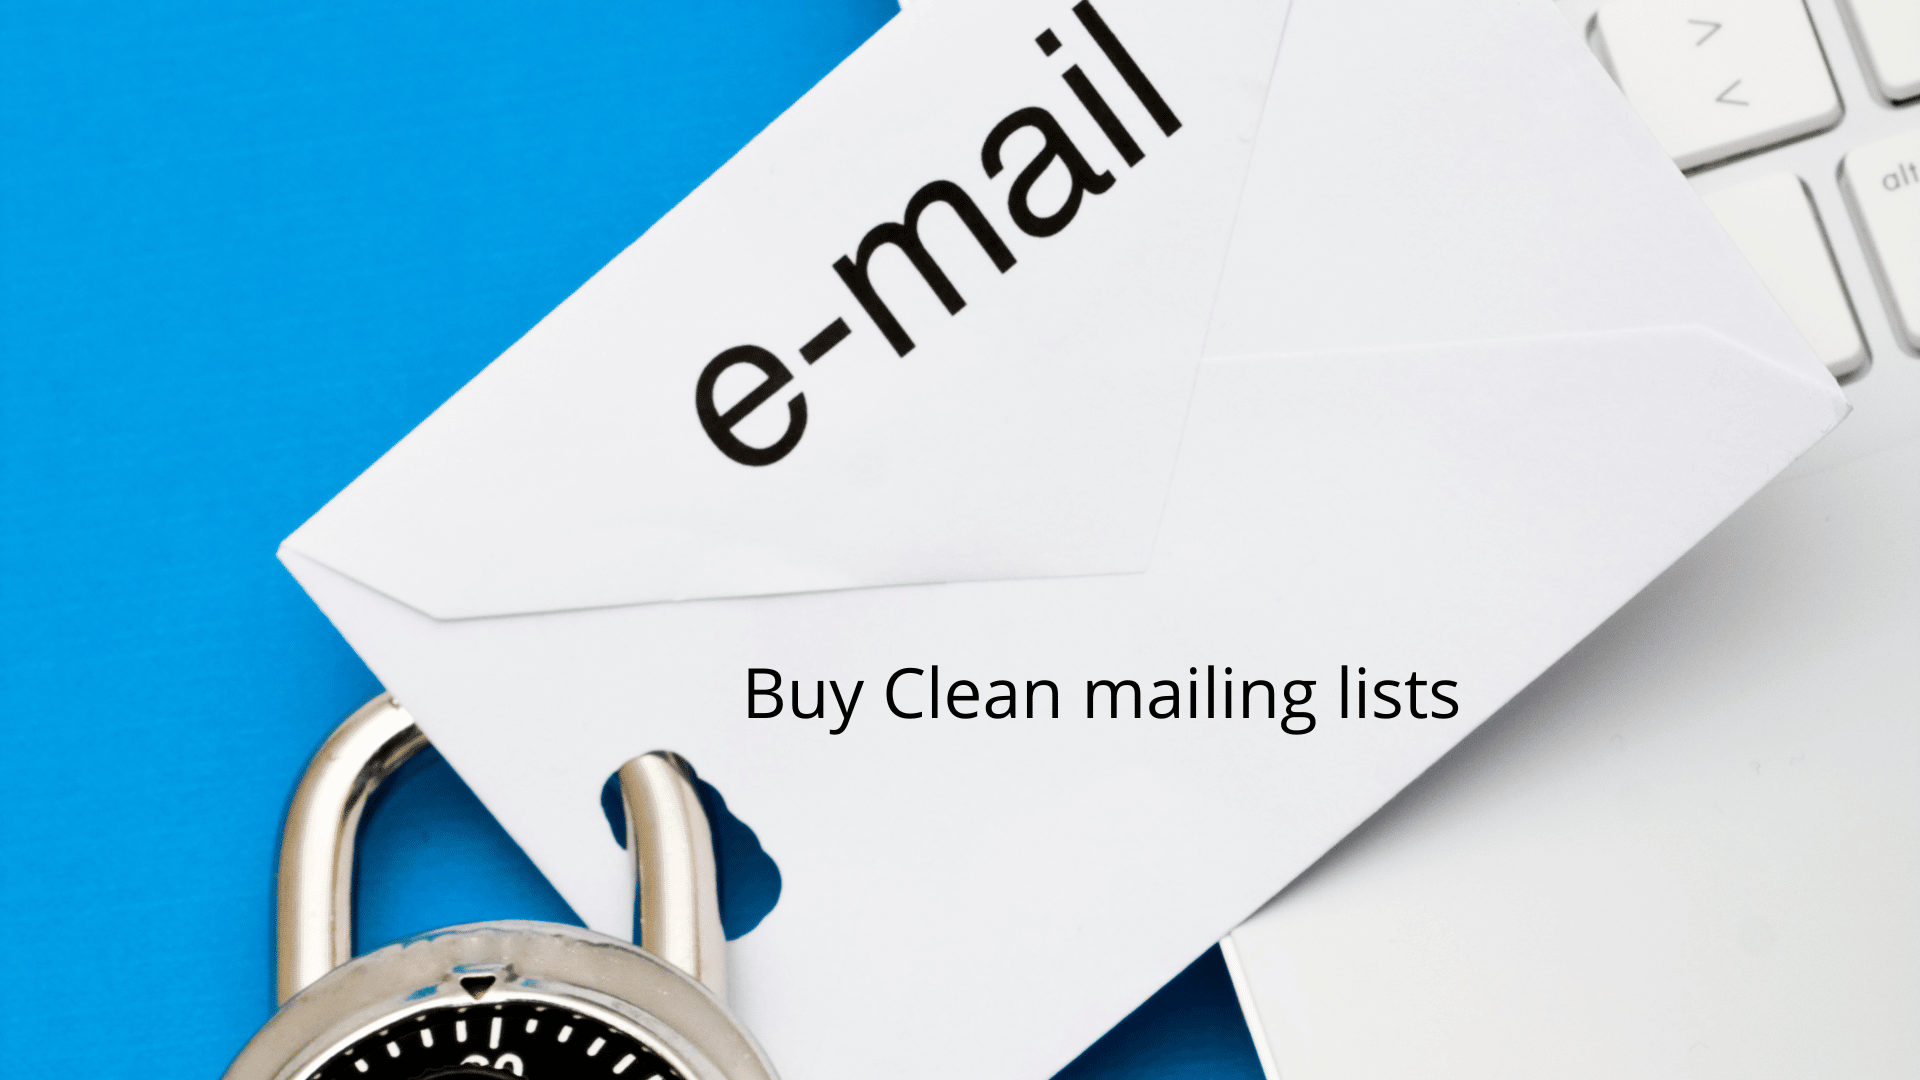 _Buy Clean mailing lists